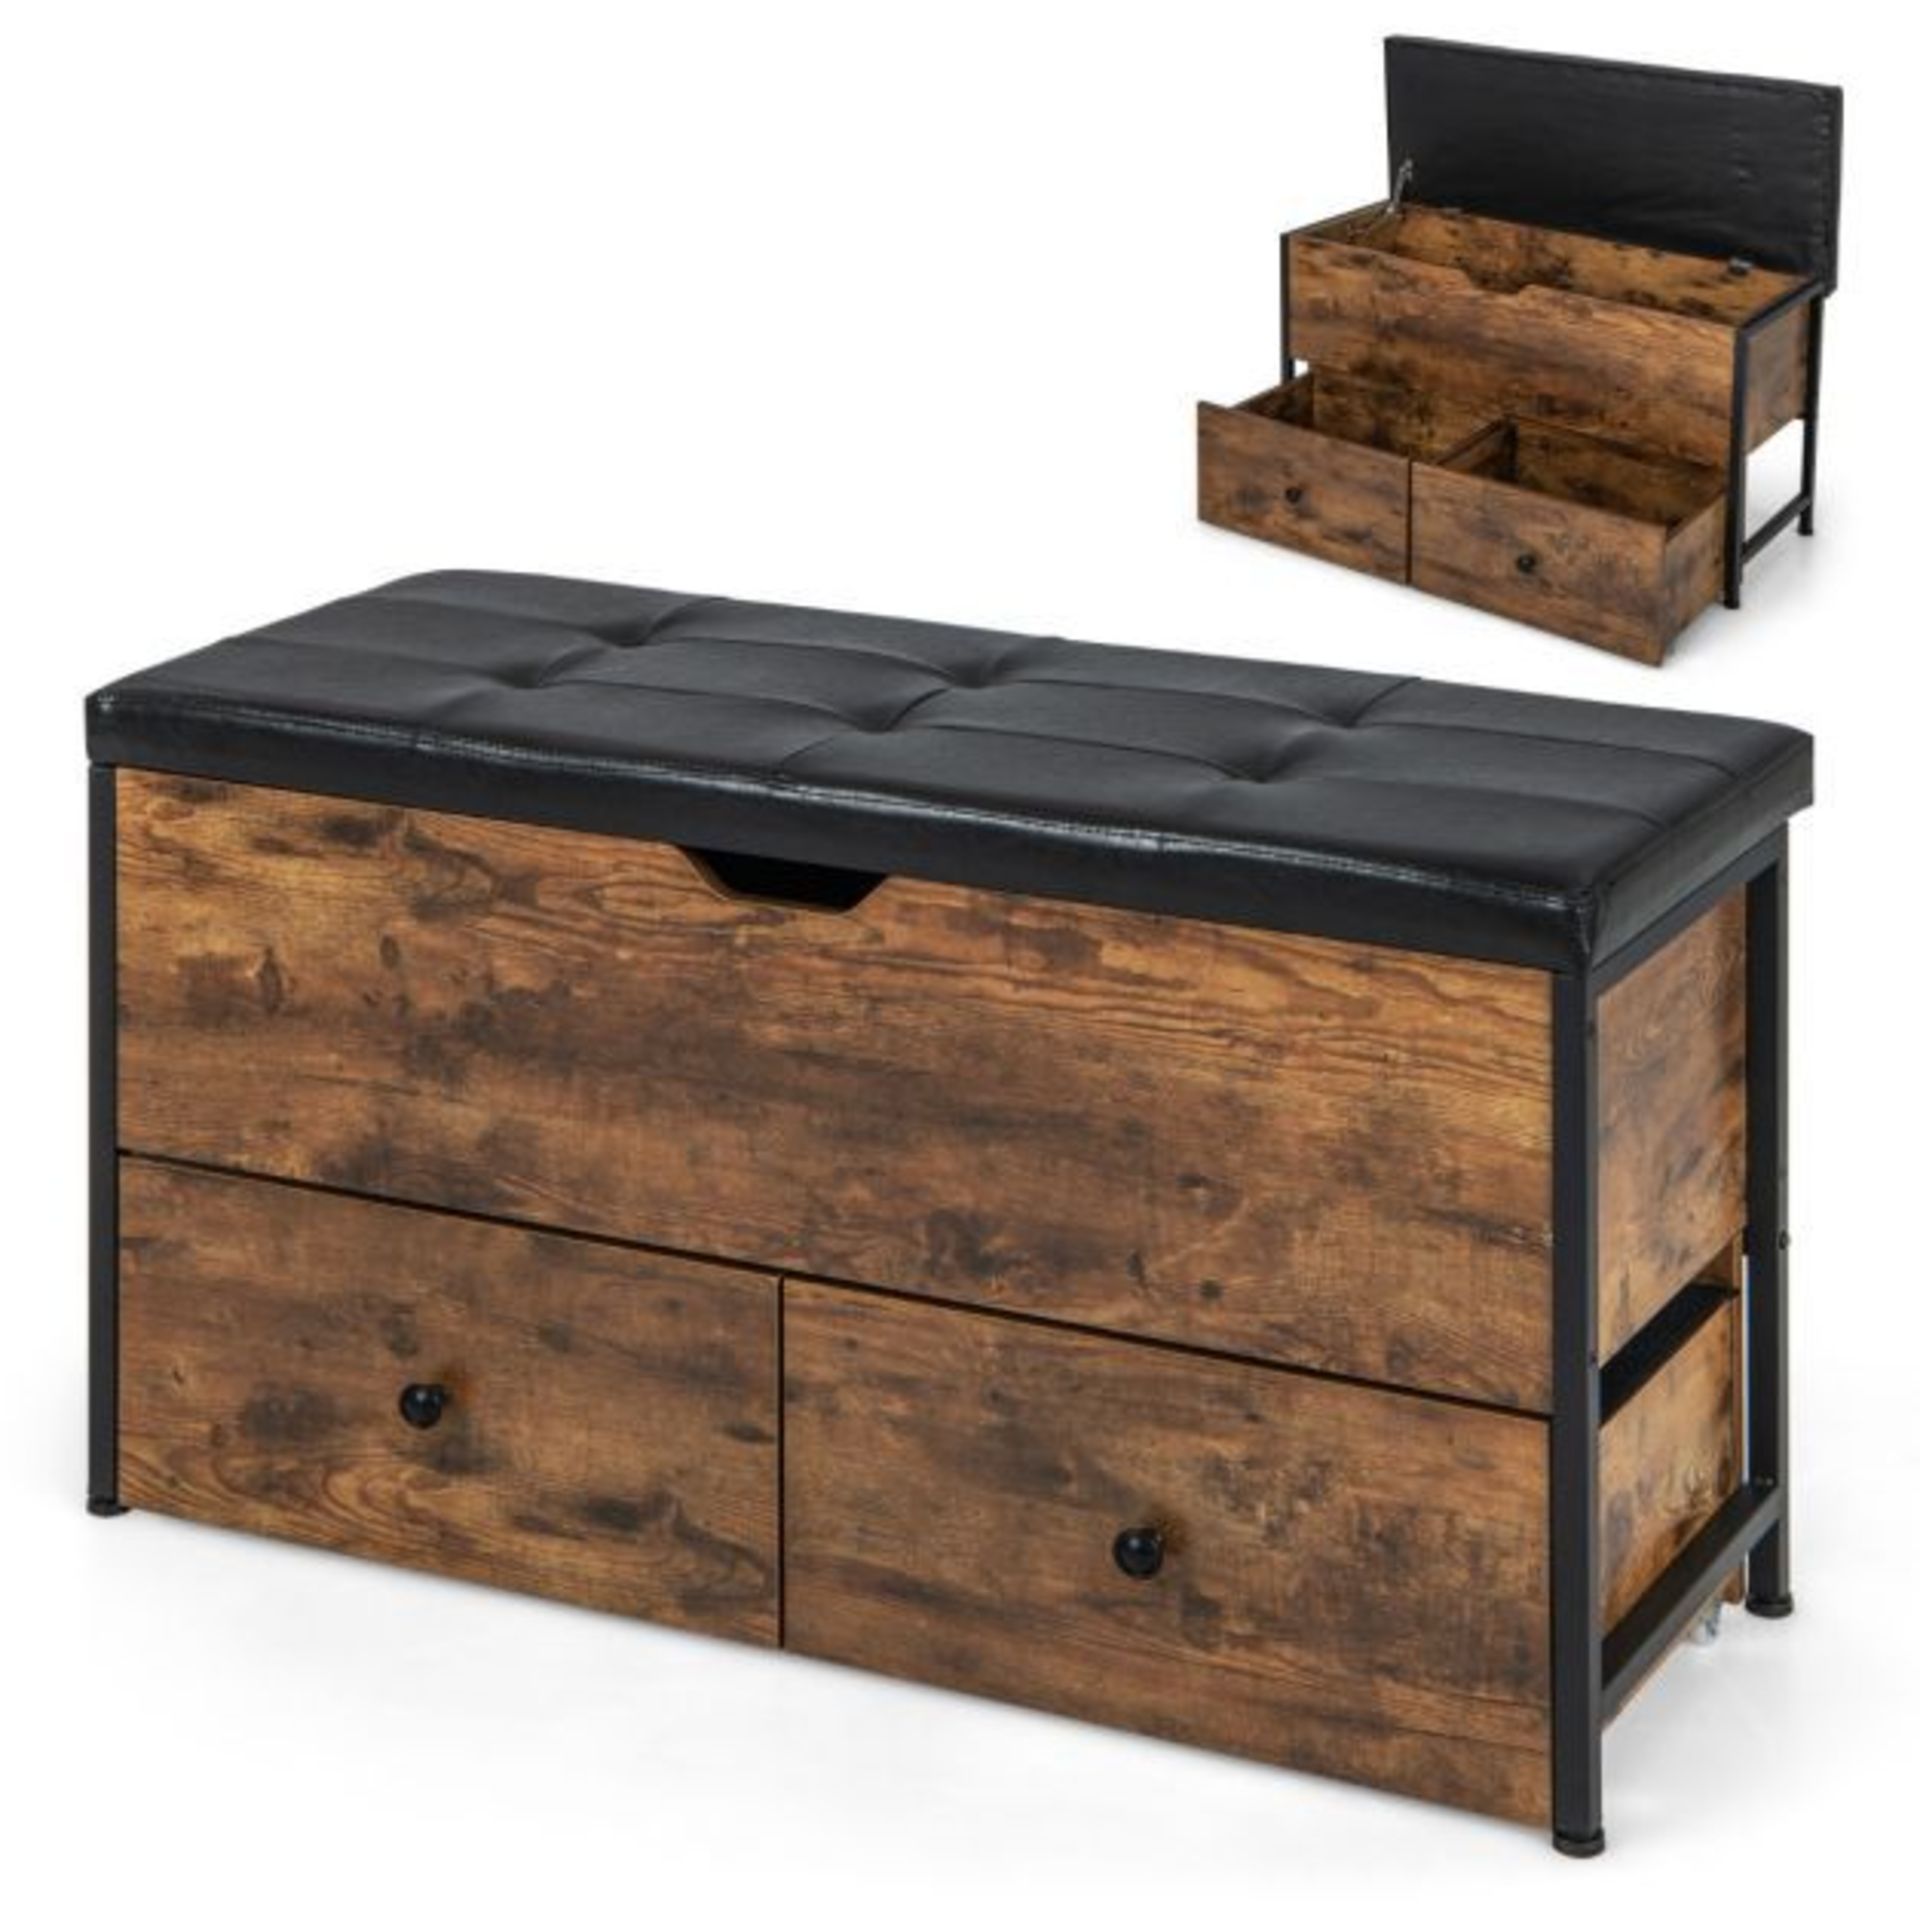 Storage Ottoman Bench with Padded Seat Cushion and 2 Drawers. - ER54. This storage ottoman bench